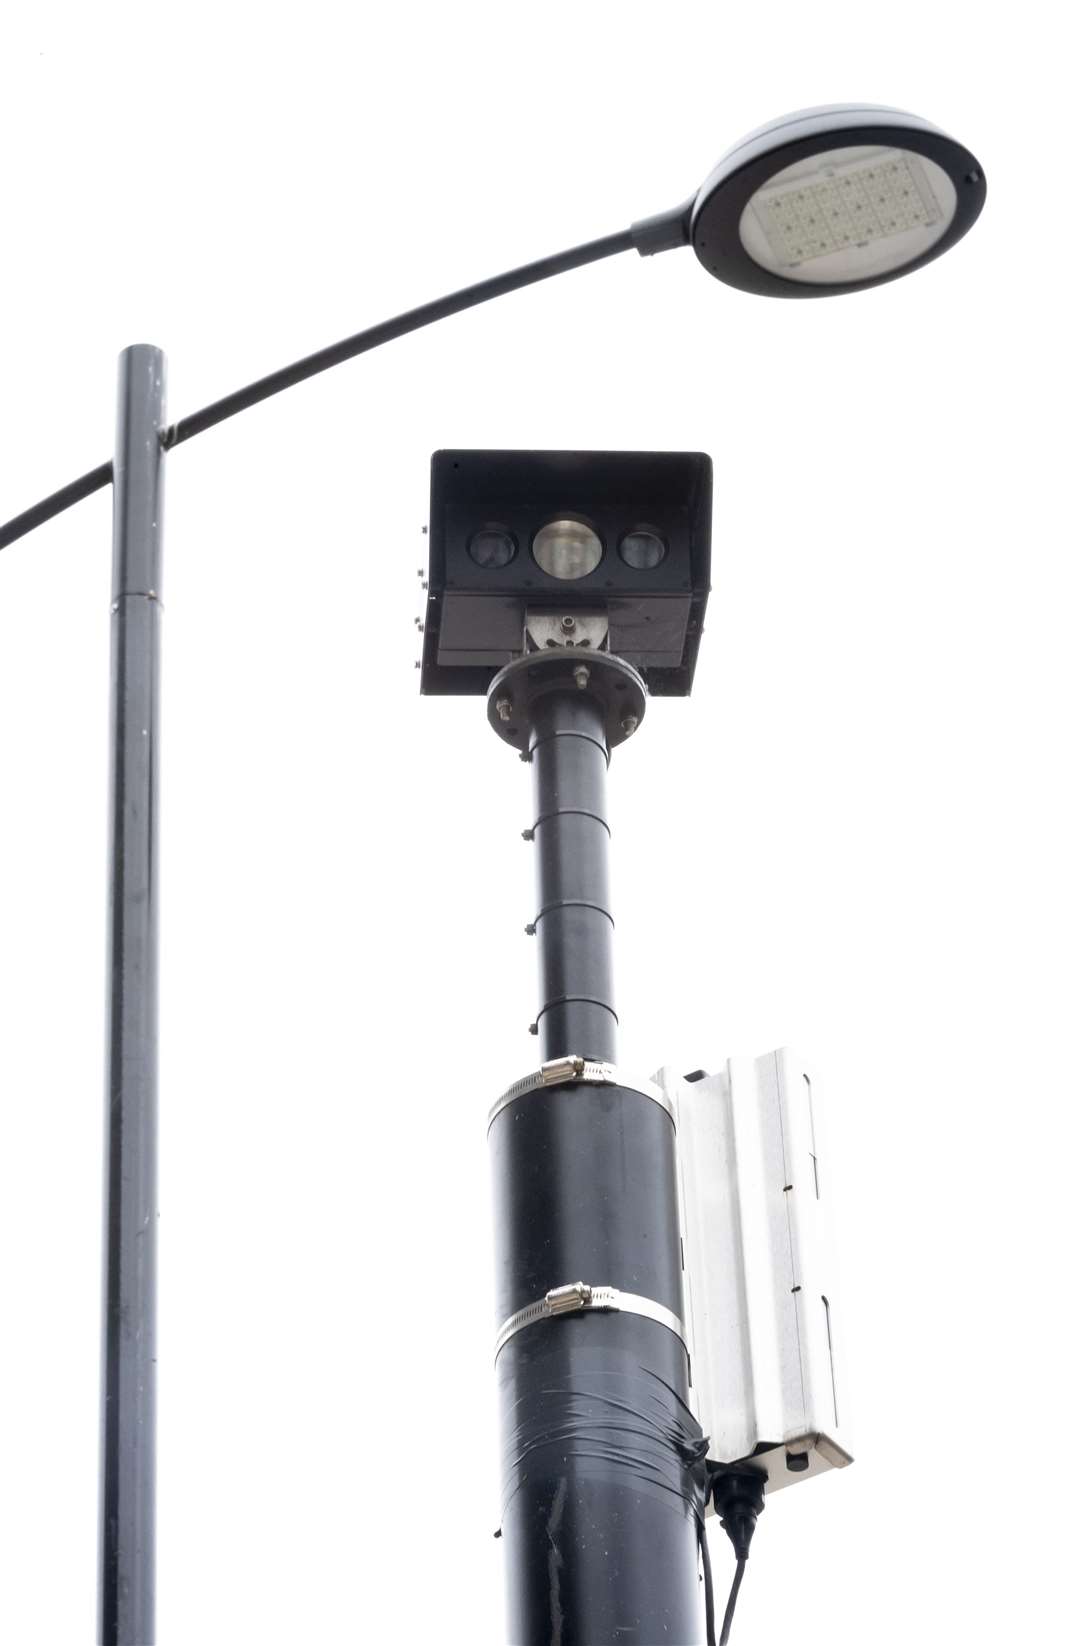 ANPR cameras are being brought in